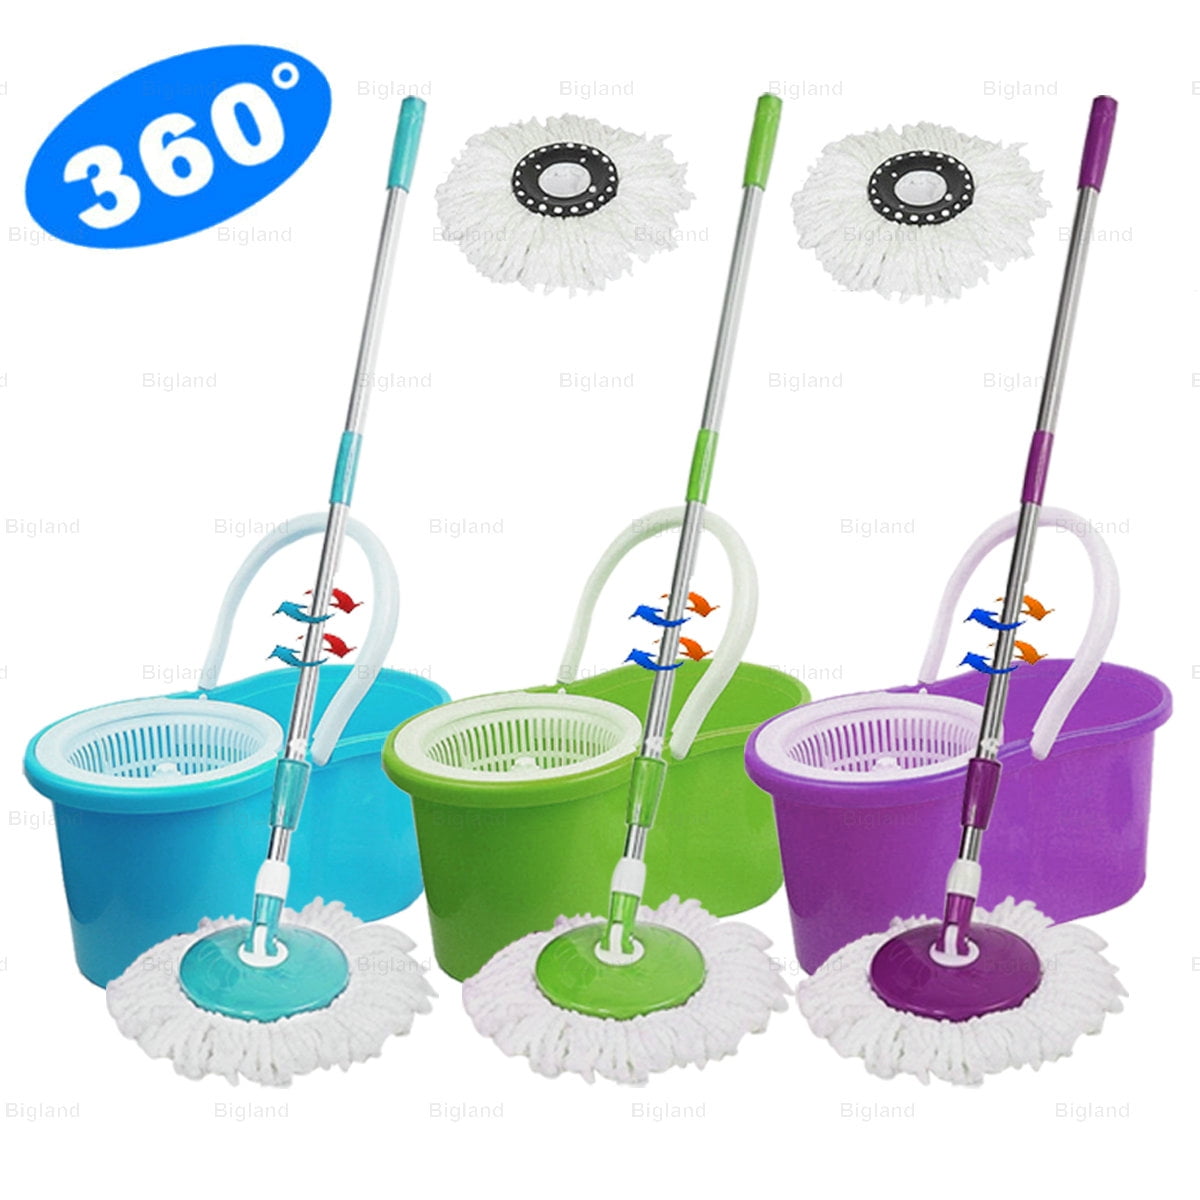 AMSUPER 360ﾂｰ Spin Mop with Bucket & Dual Mop Heads Floor Cleaning Tools - Best  Floor Mop Easy to Use - for Professional Home, Kitchen, Office (Blue) 